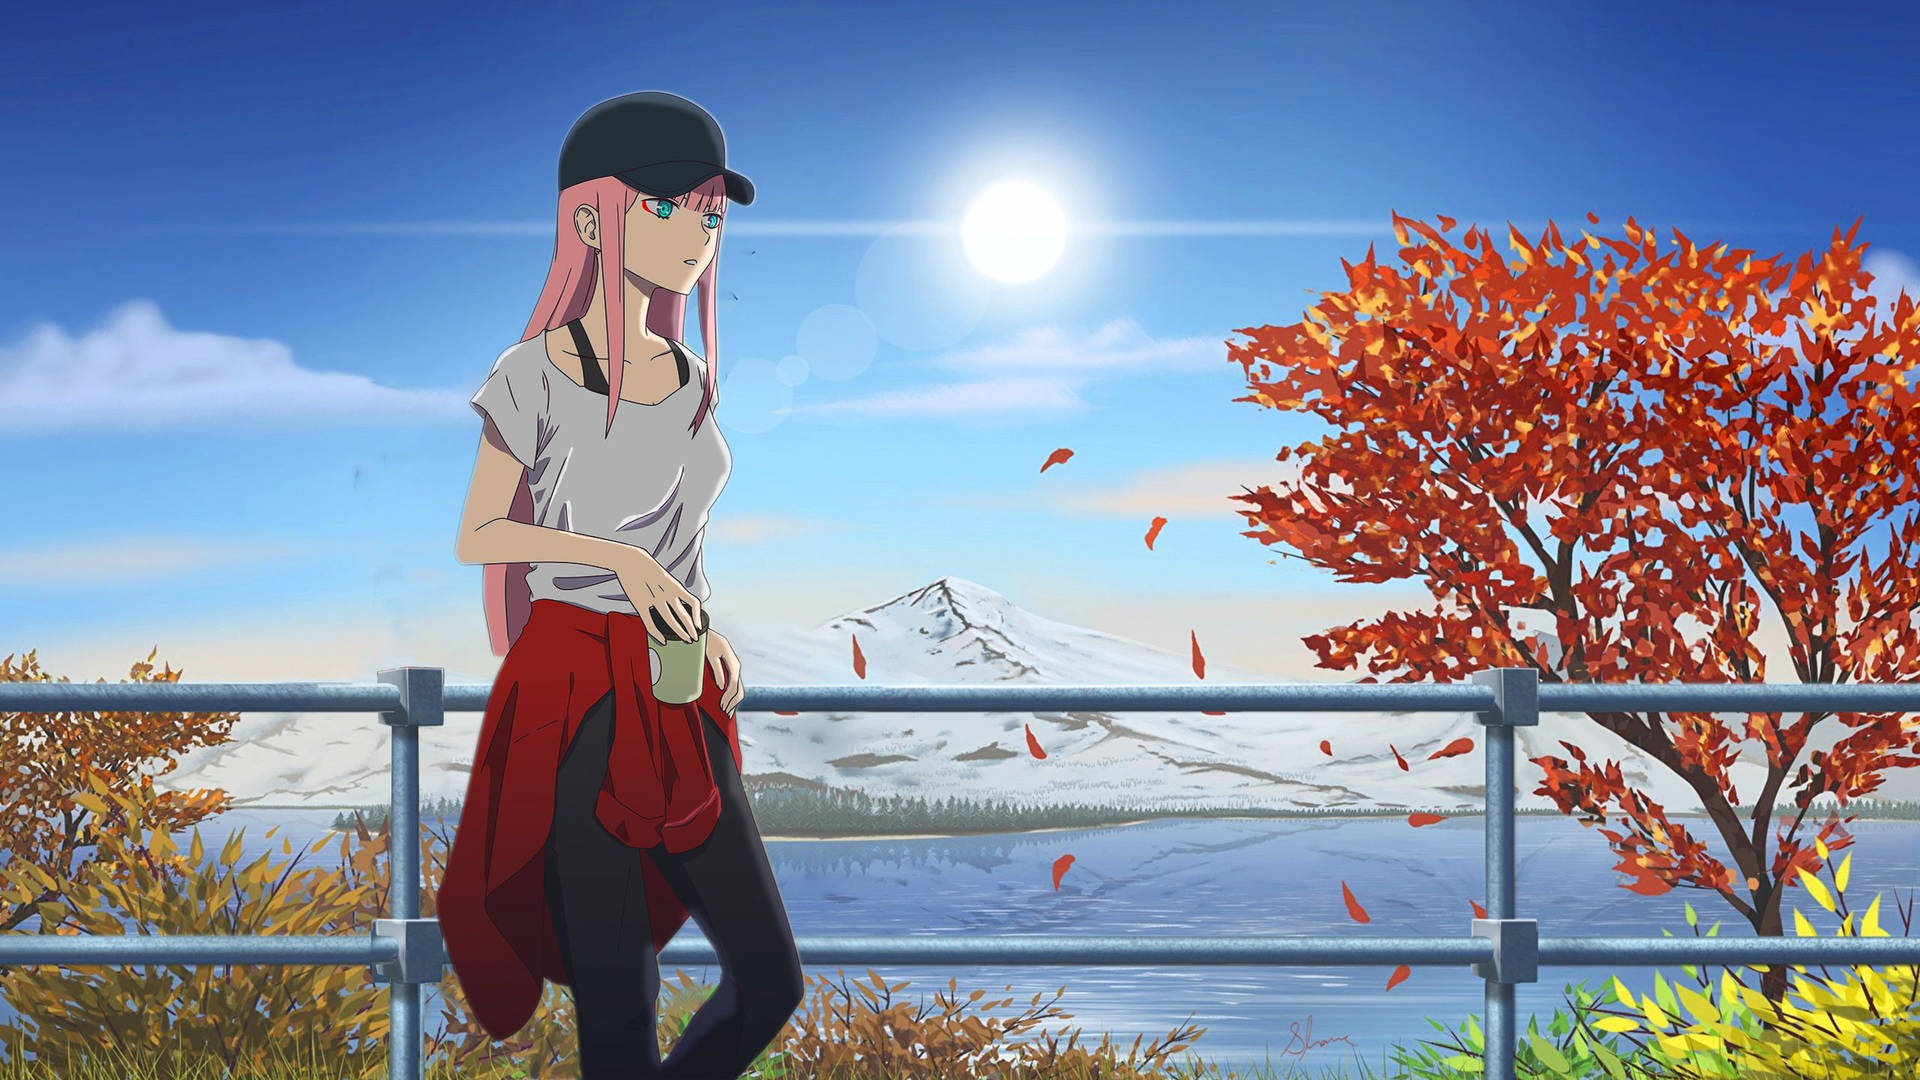 Hiro and Zero Two standing in the warm sunlight Wallpaper